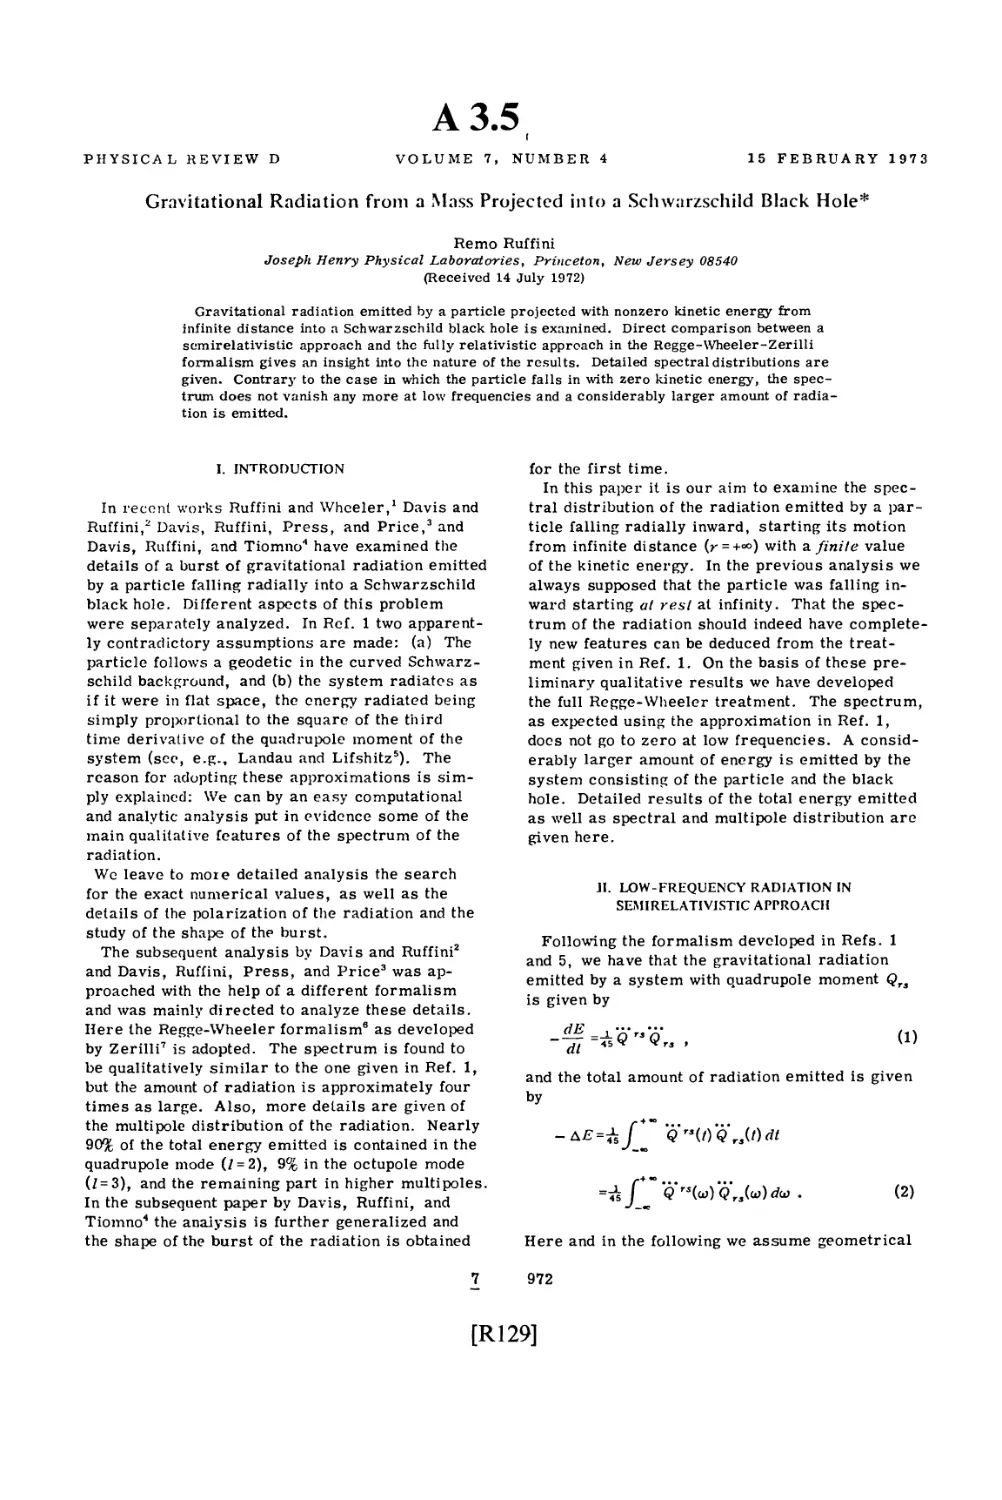 Appendix 3.5 Gravitation Radiation from a Mass Projected into a Schwarzschild Black Hole / R. Ruffini